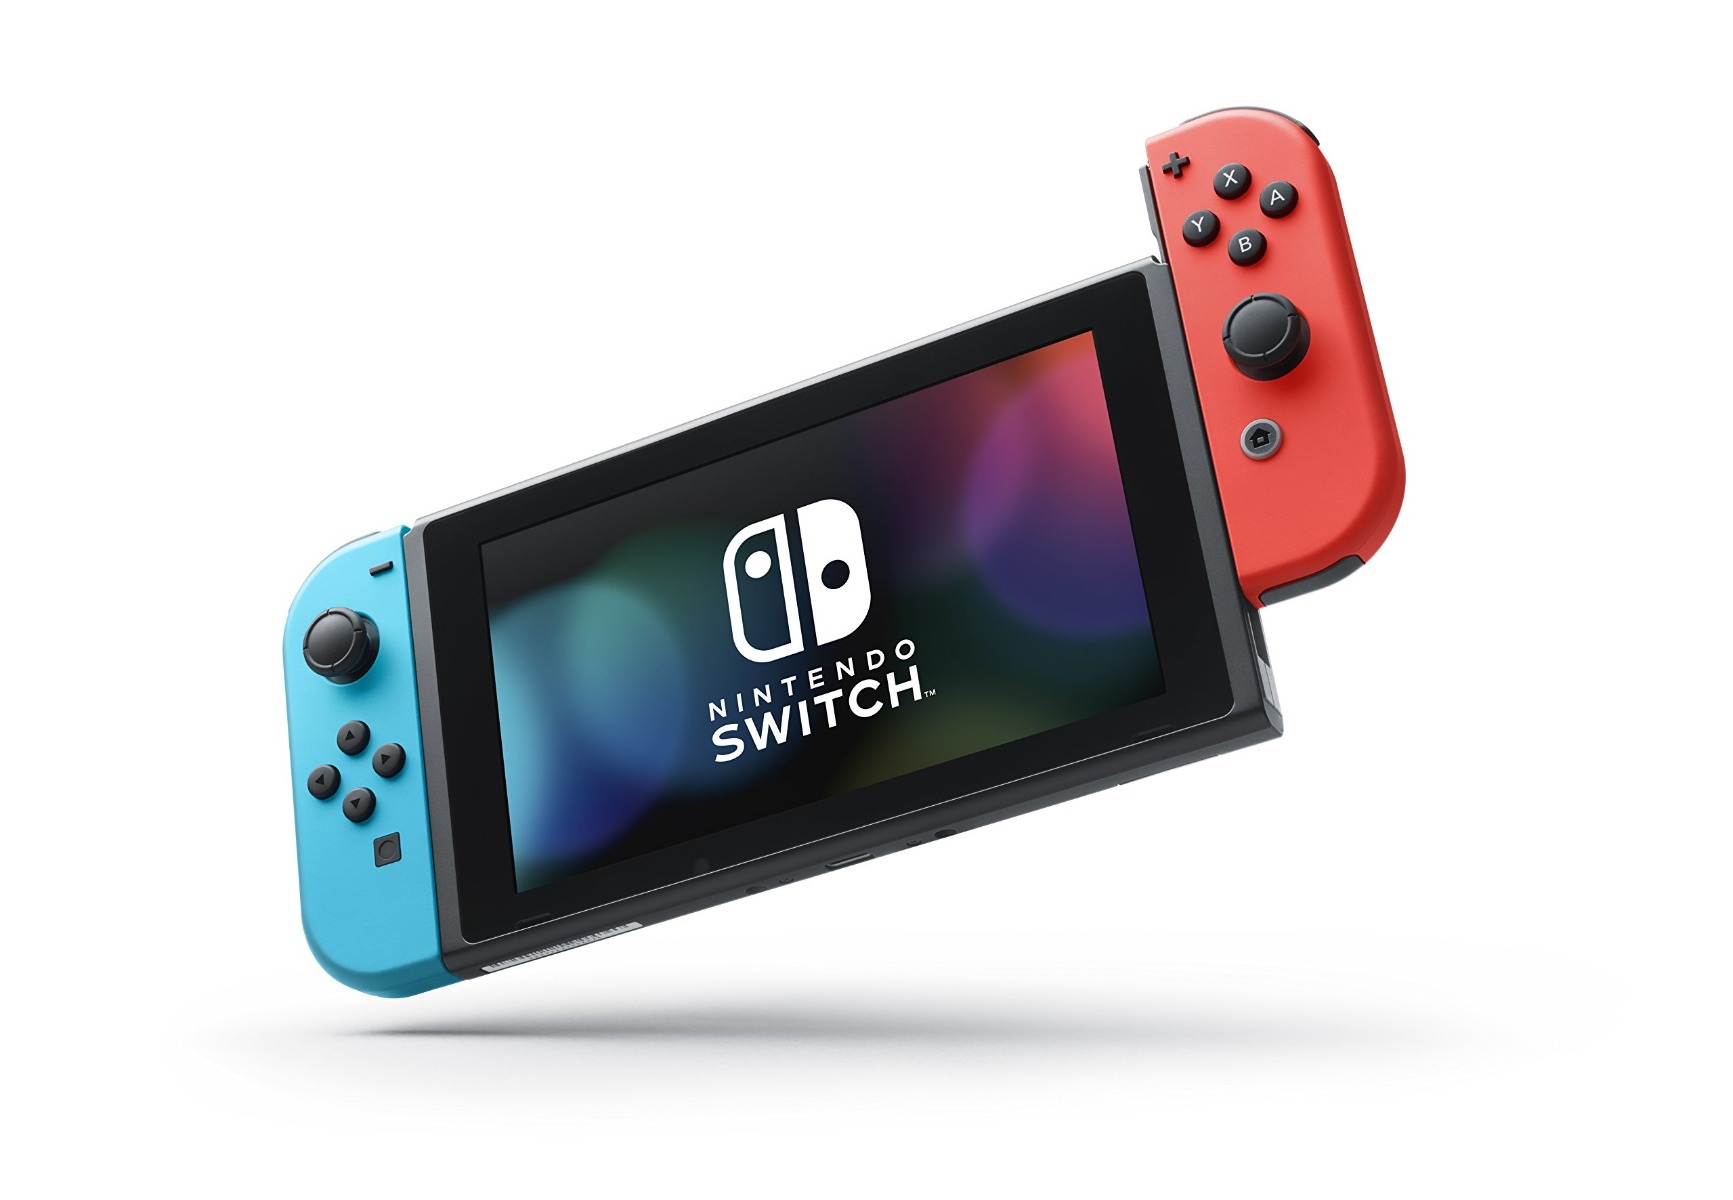 Nintendo Switch Console with Neon Blue and Red Joy-Con